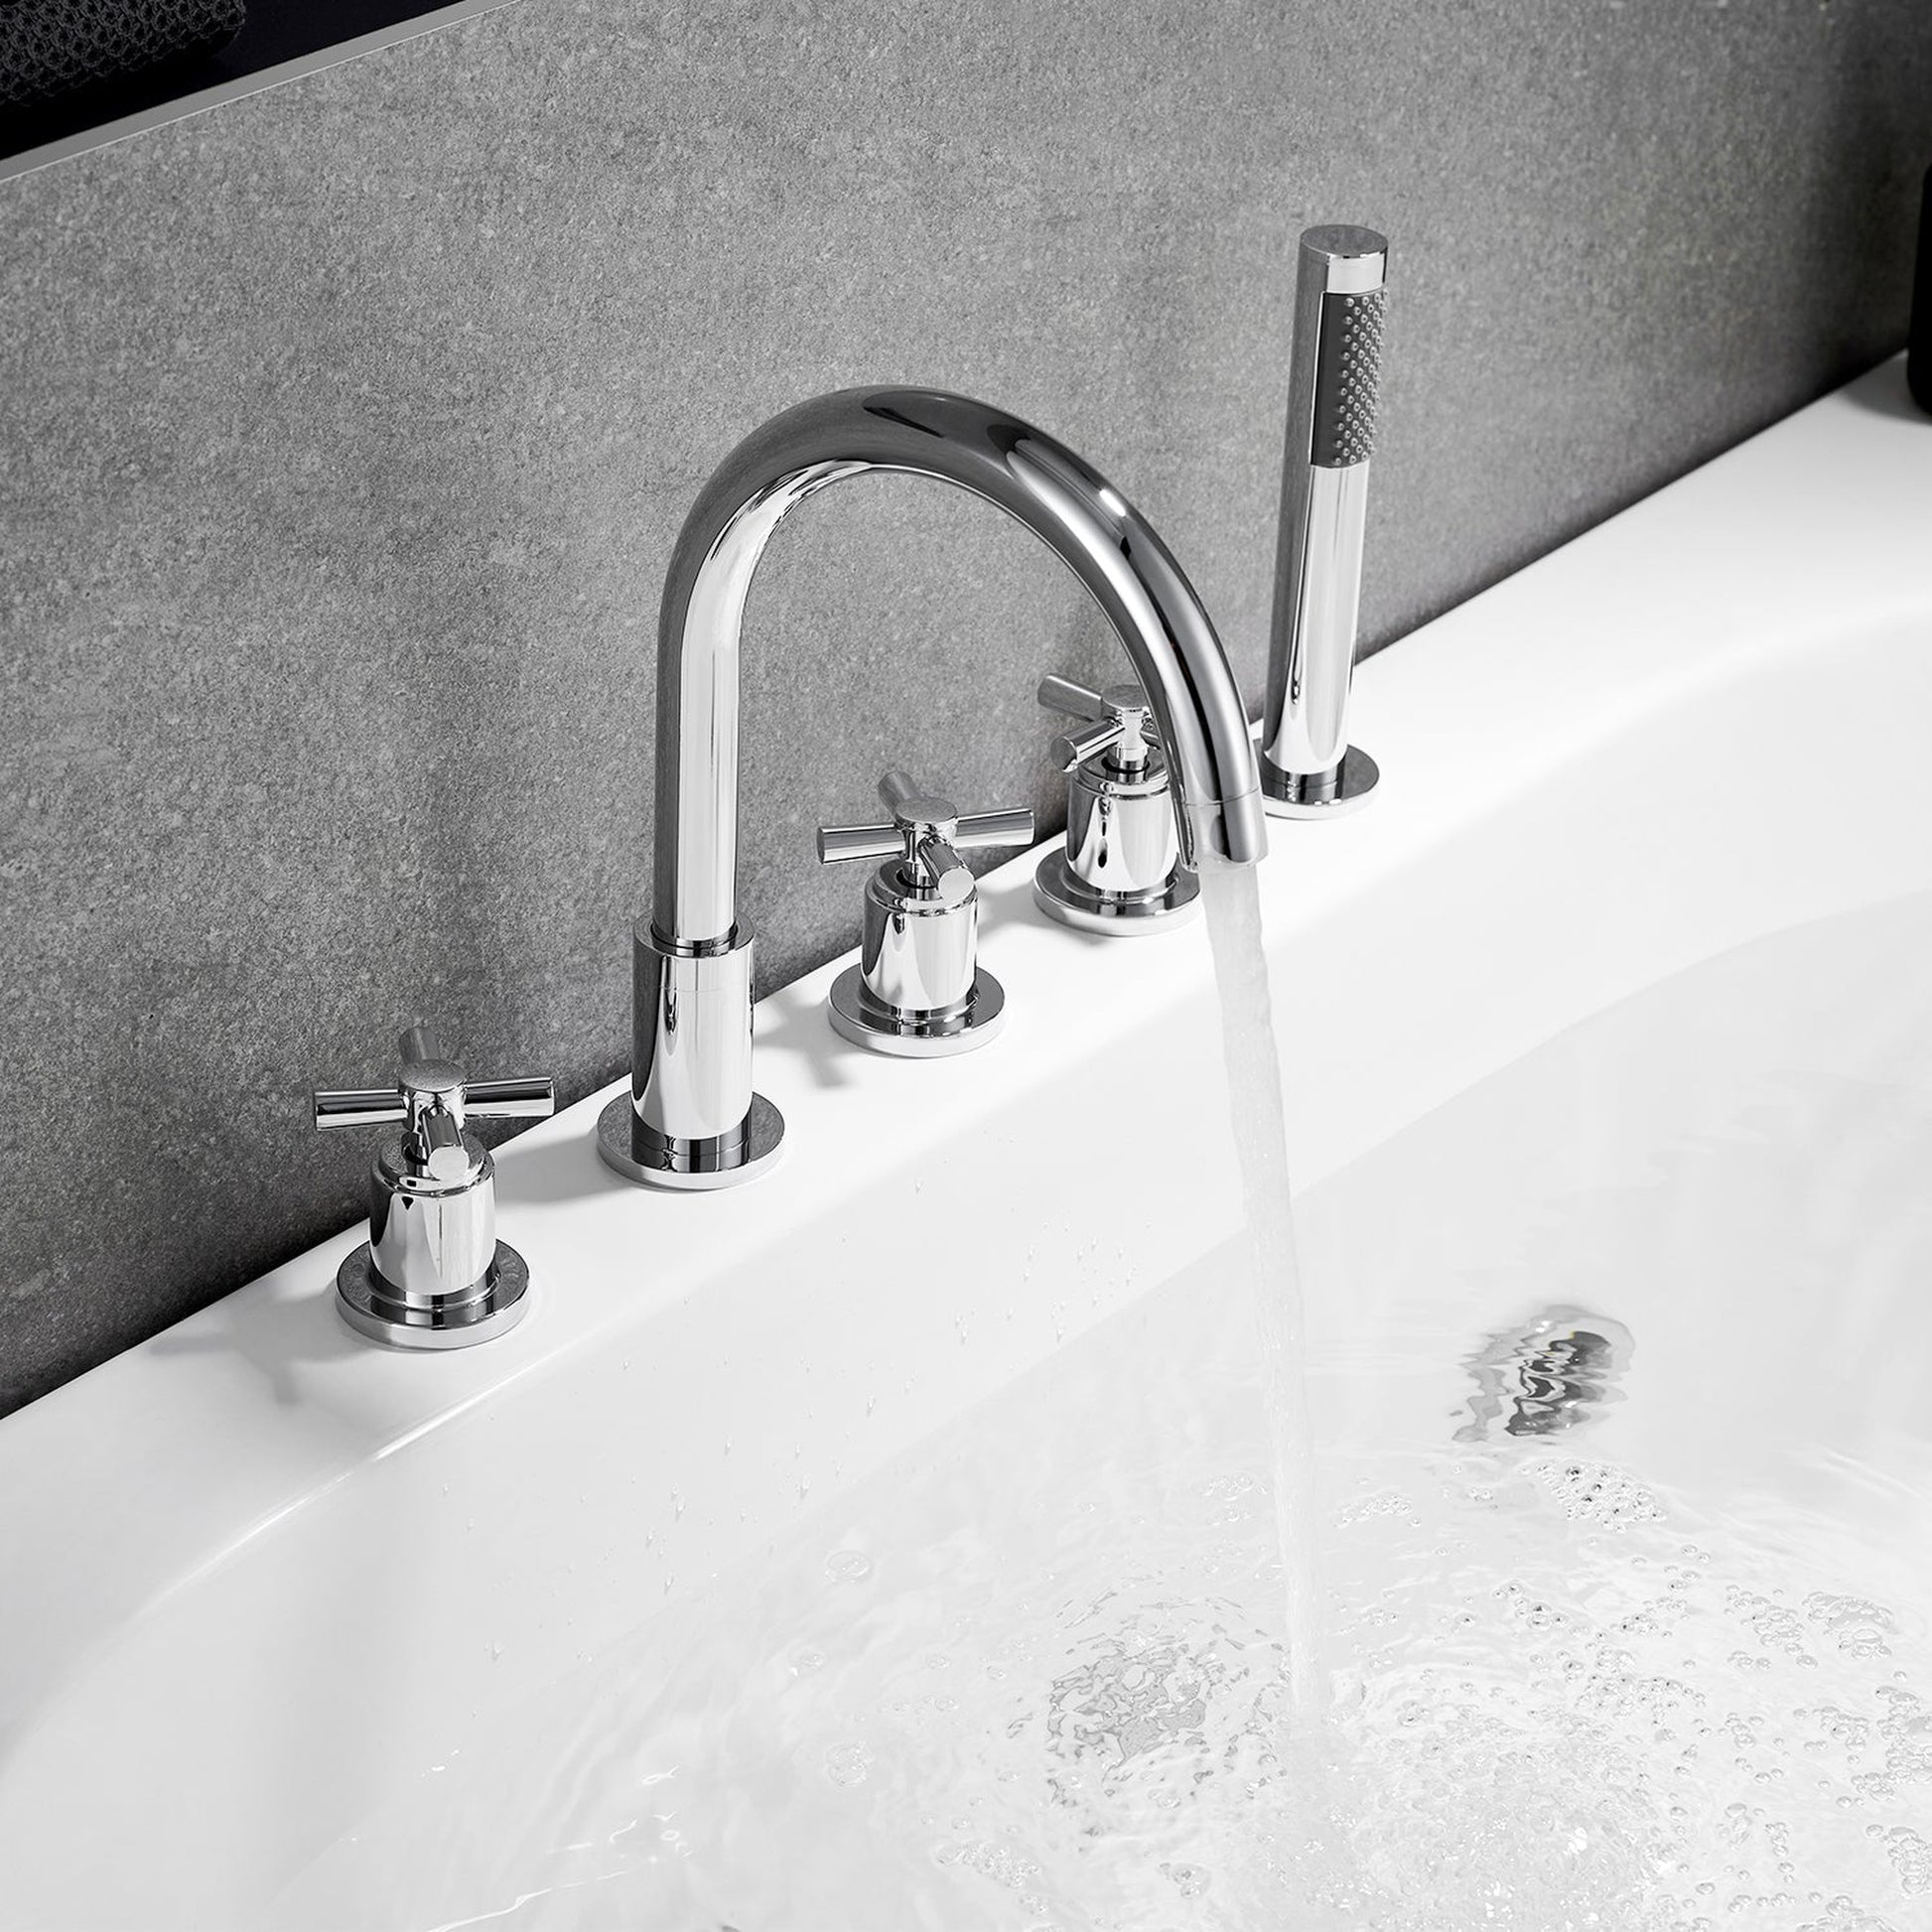 Altair Sorlia Polished Chome Cross Handles Deck-mounted Bathtub Faucet With Handshower